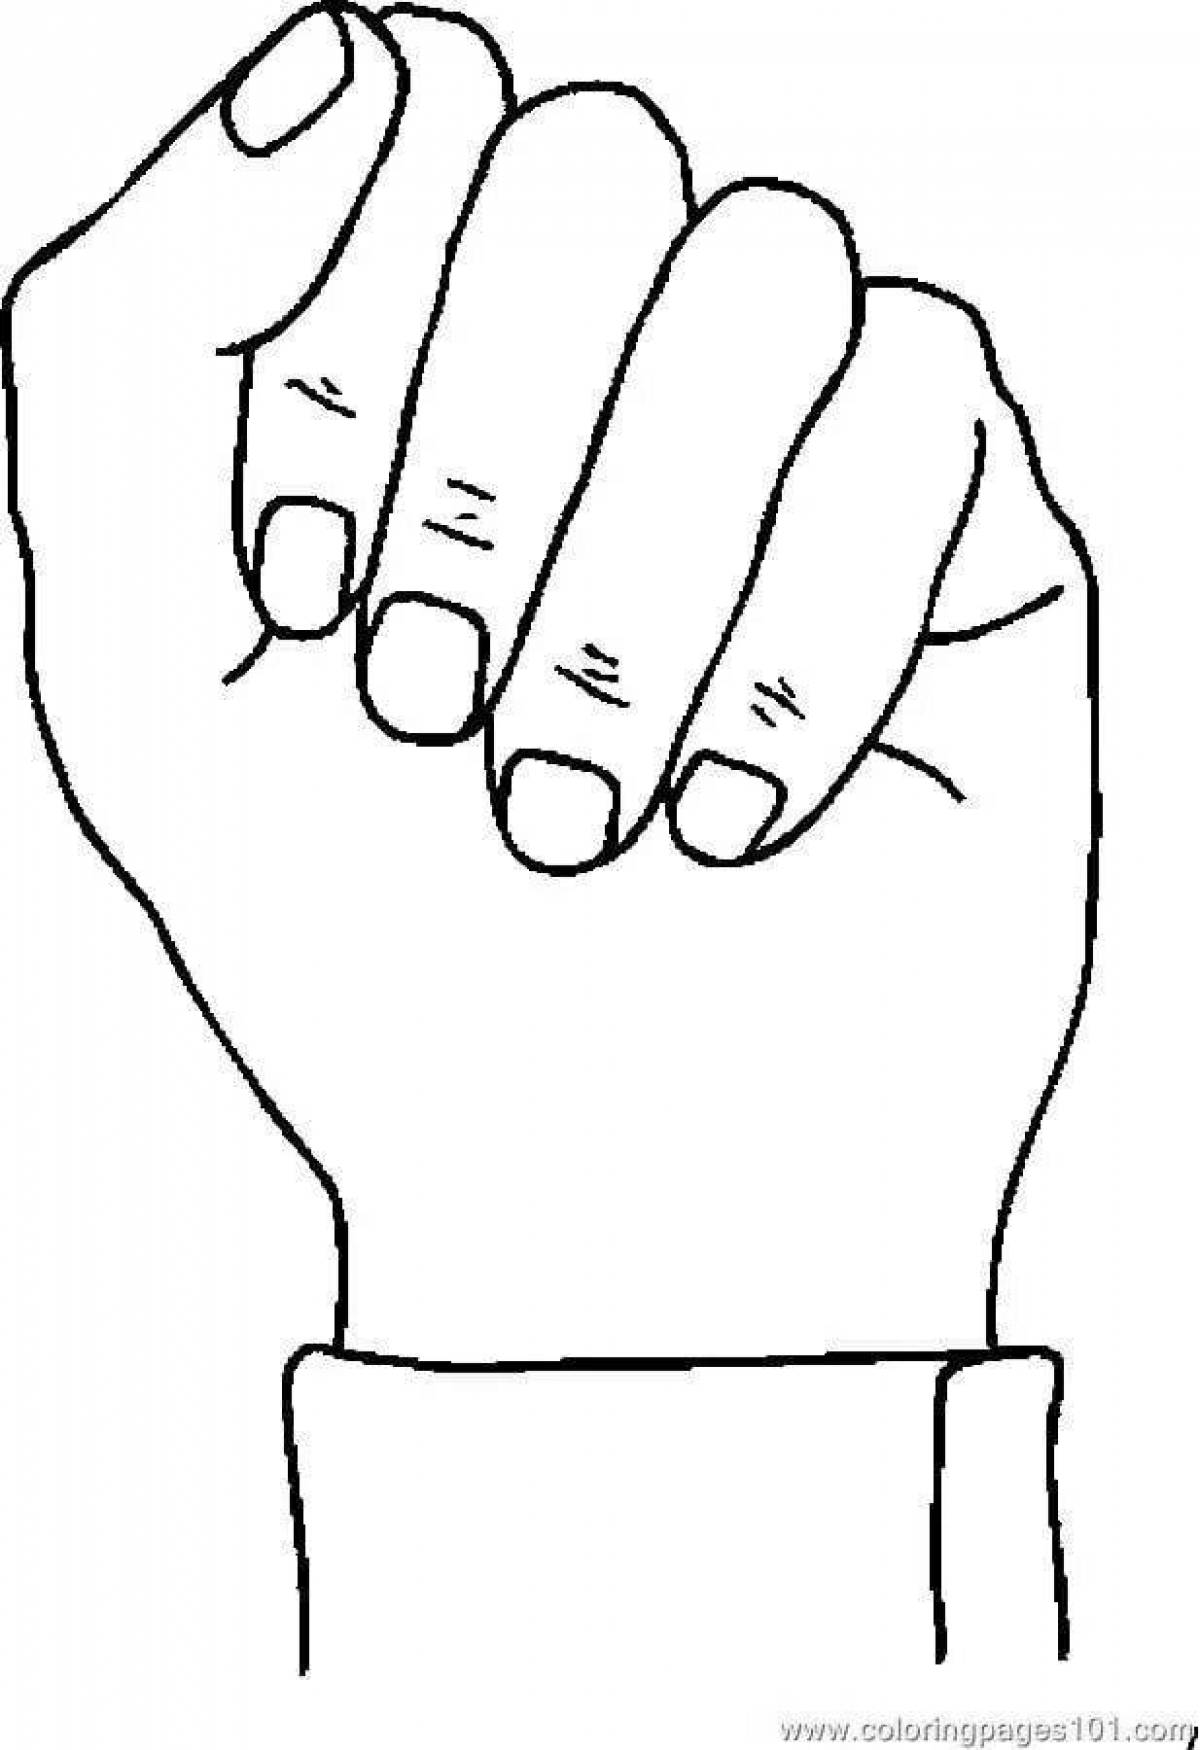 Gorgeous fist coloring page